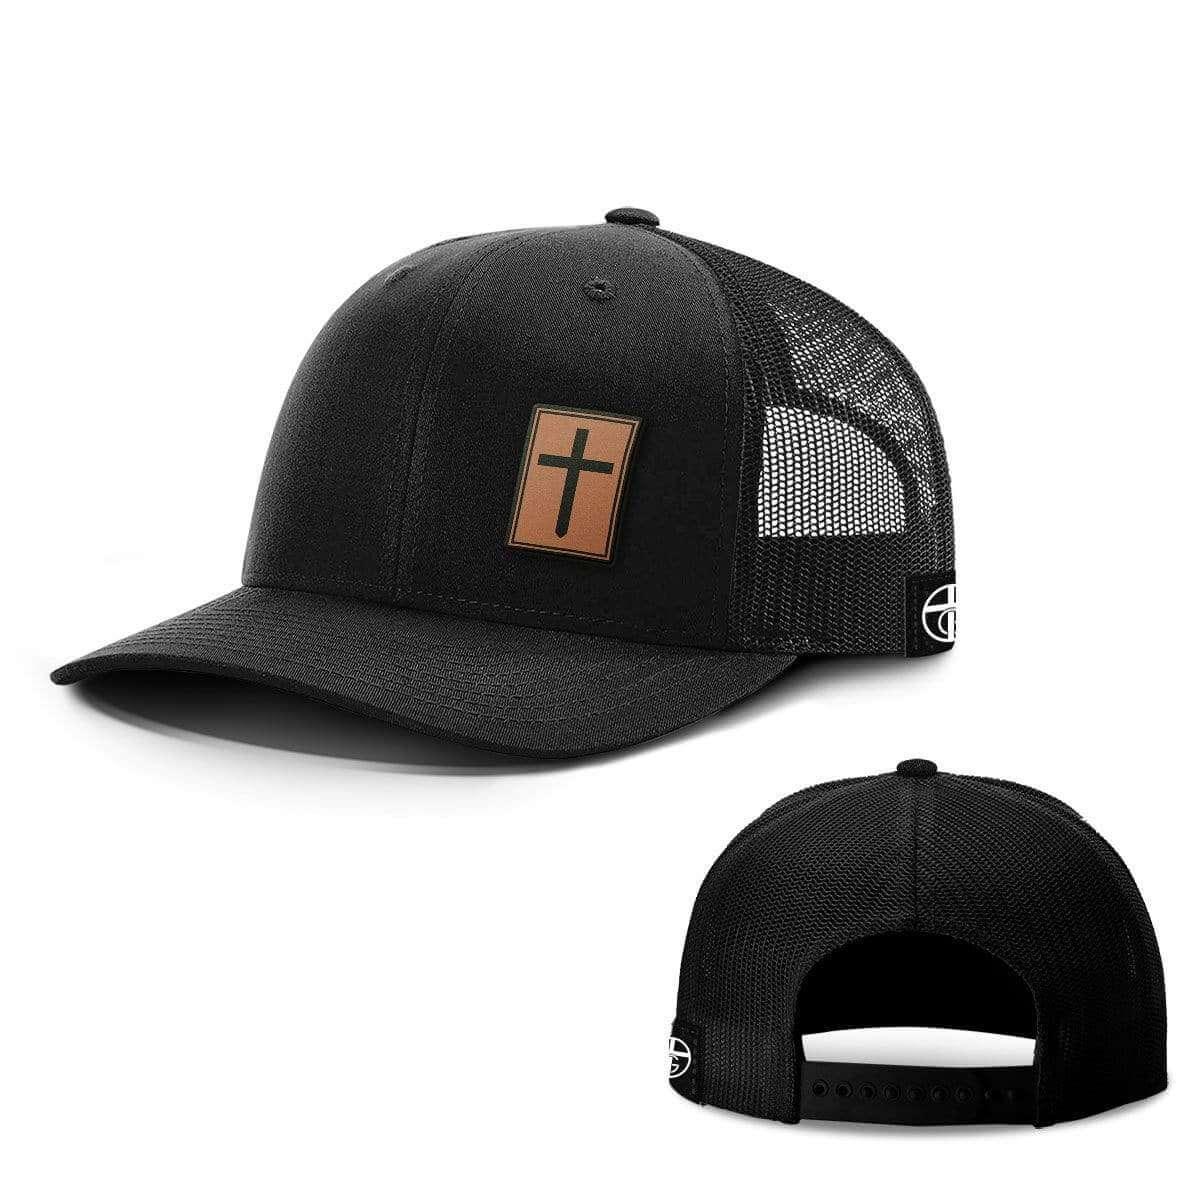 Cross Leather Patch Hats